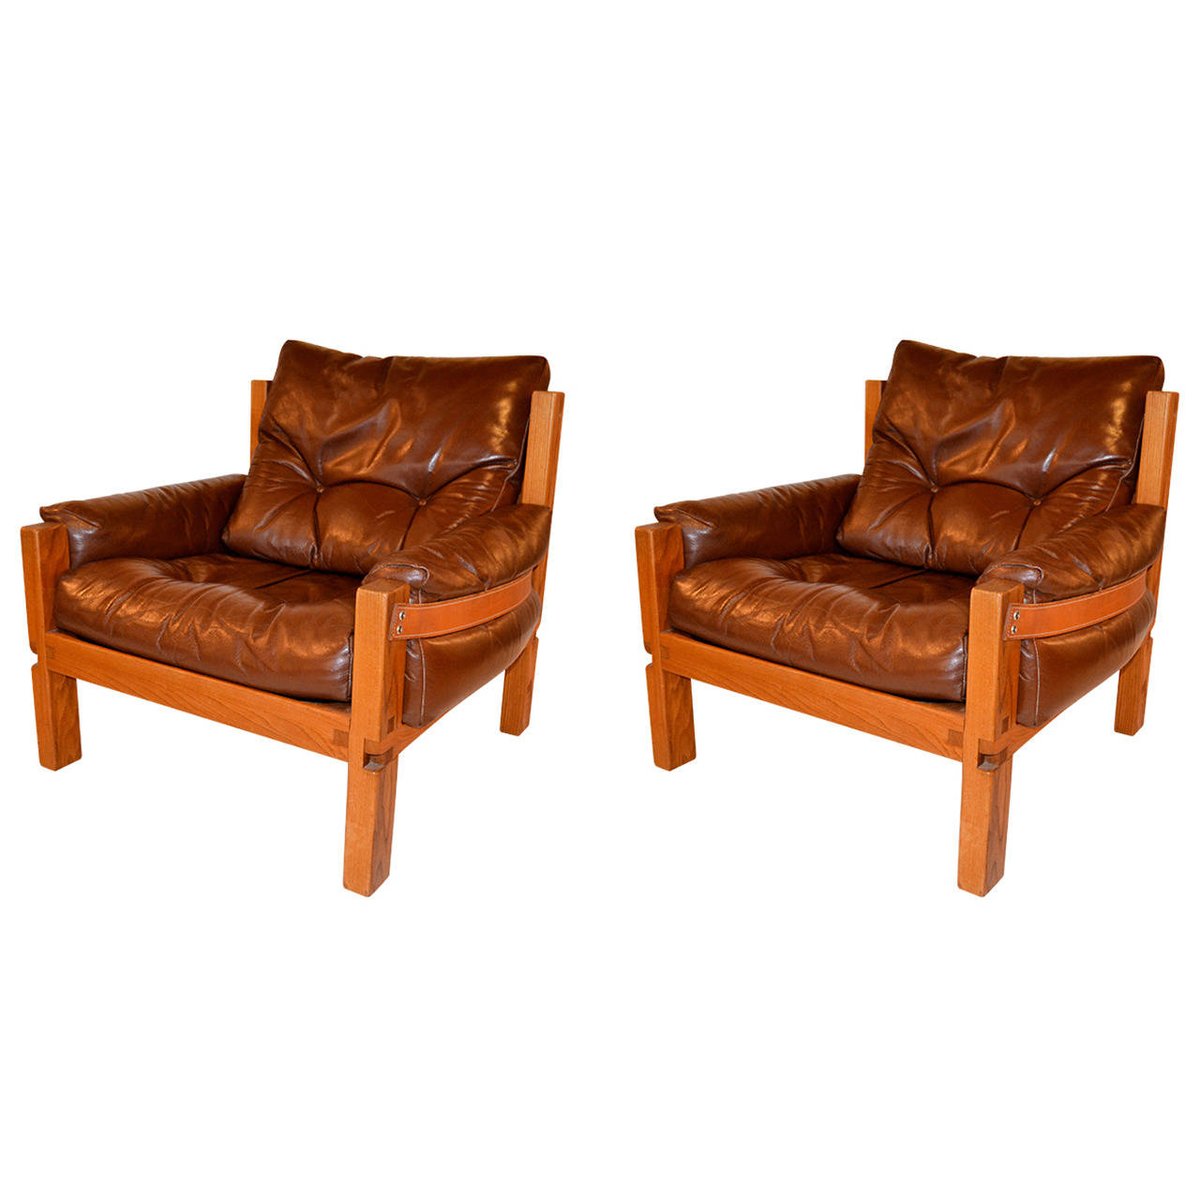 Armchairs Pierre Chapo 1960s Set Of 2 For Sale At Pamono with regard to 1960s armchairs for sale with regard to Motivate